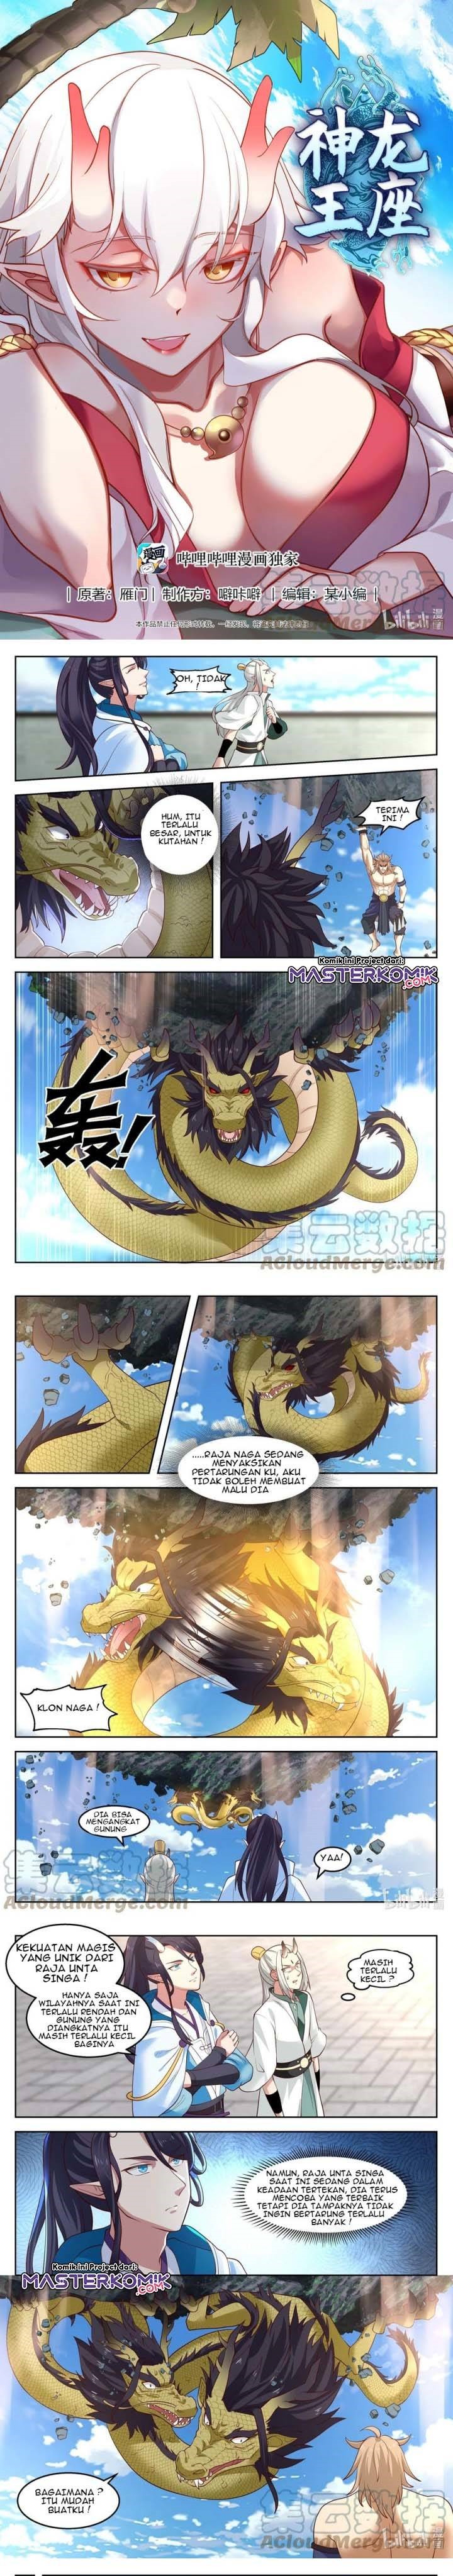 Dragon Throne Chapter 107